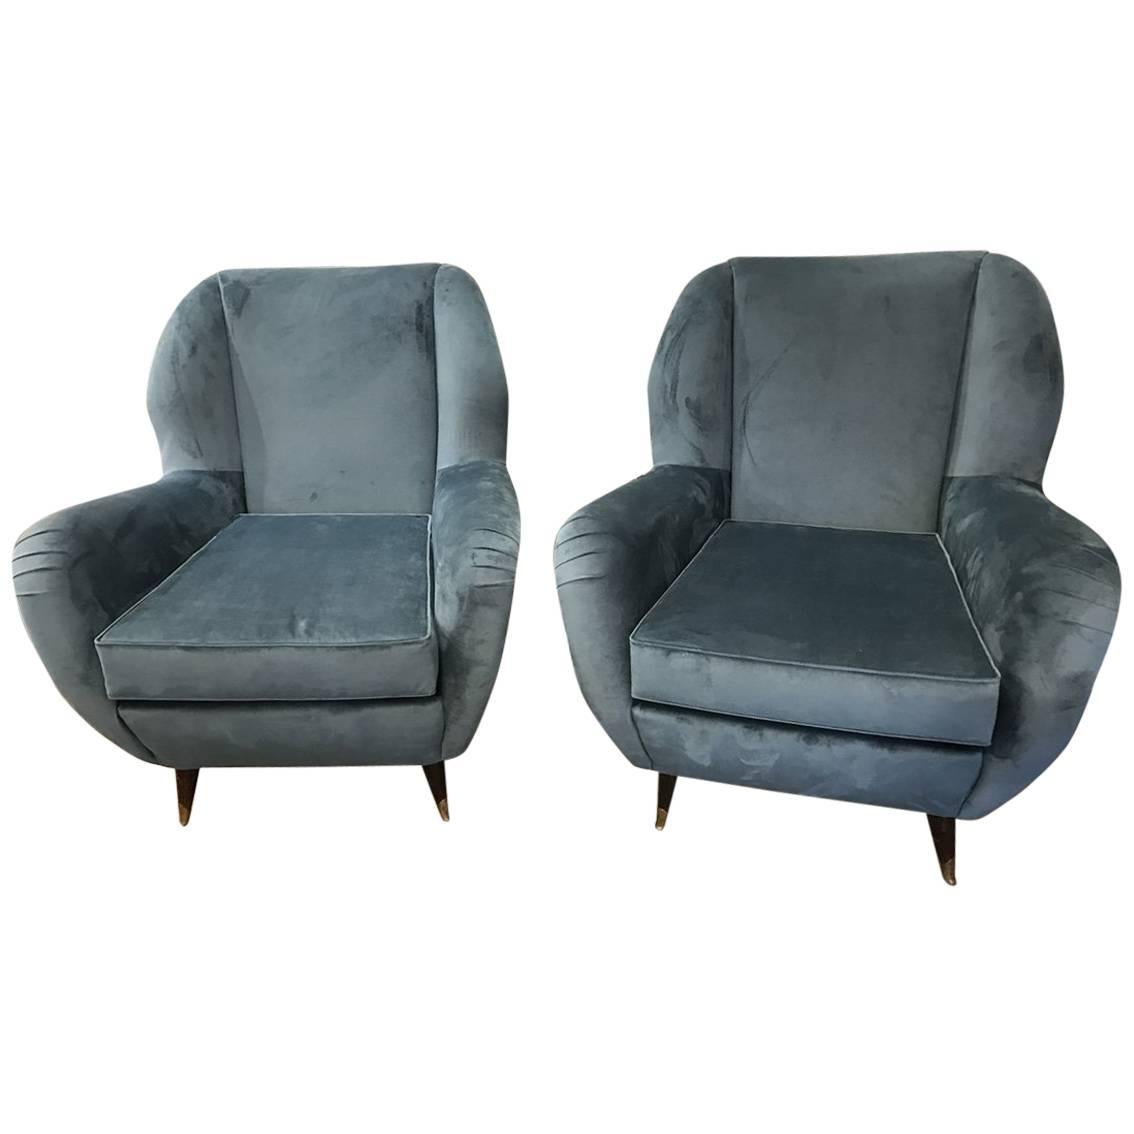 Beautiful Pair of Reupholstered Italian Armchairs, circa 1960 For Sale